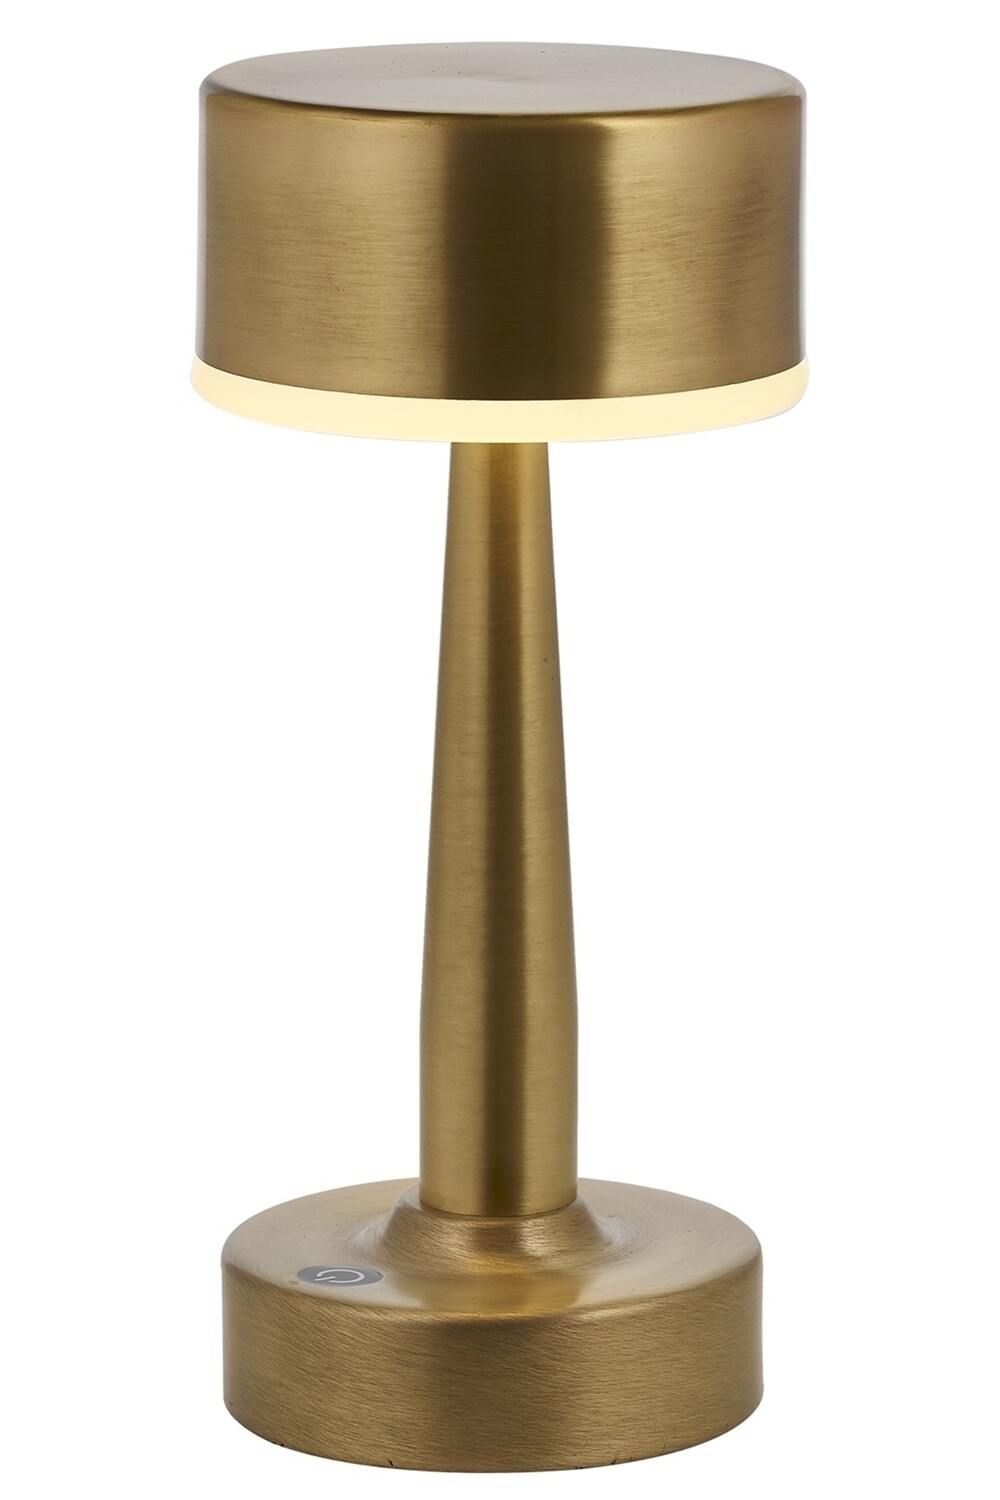 Tischlein portable and rechargeable Table-lamp for Outdoor and Indoor Antique